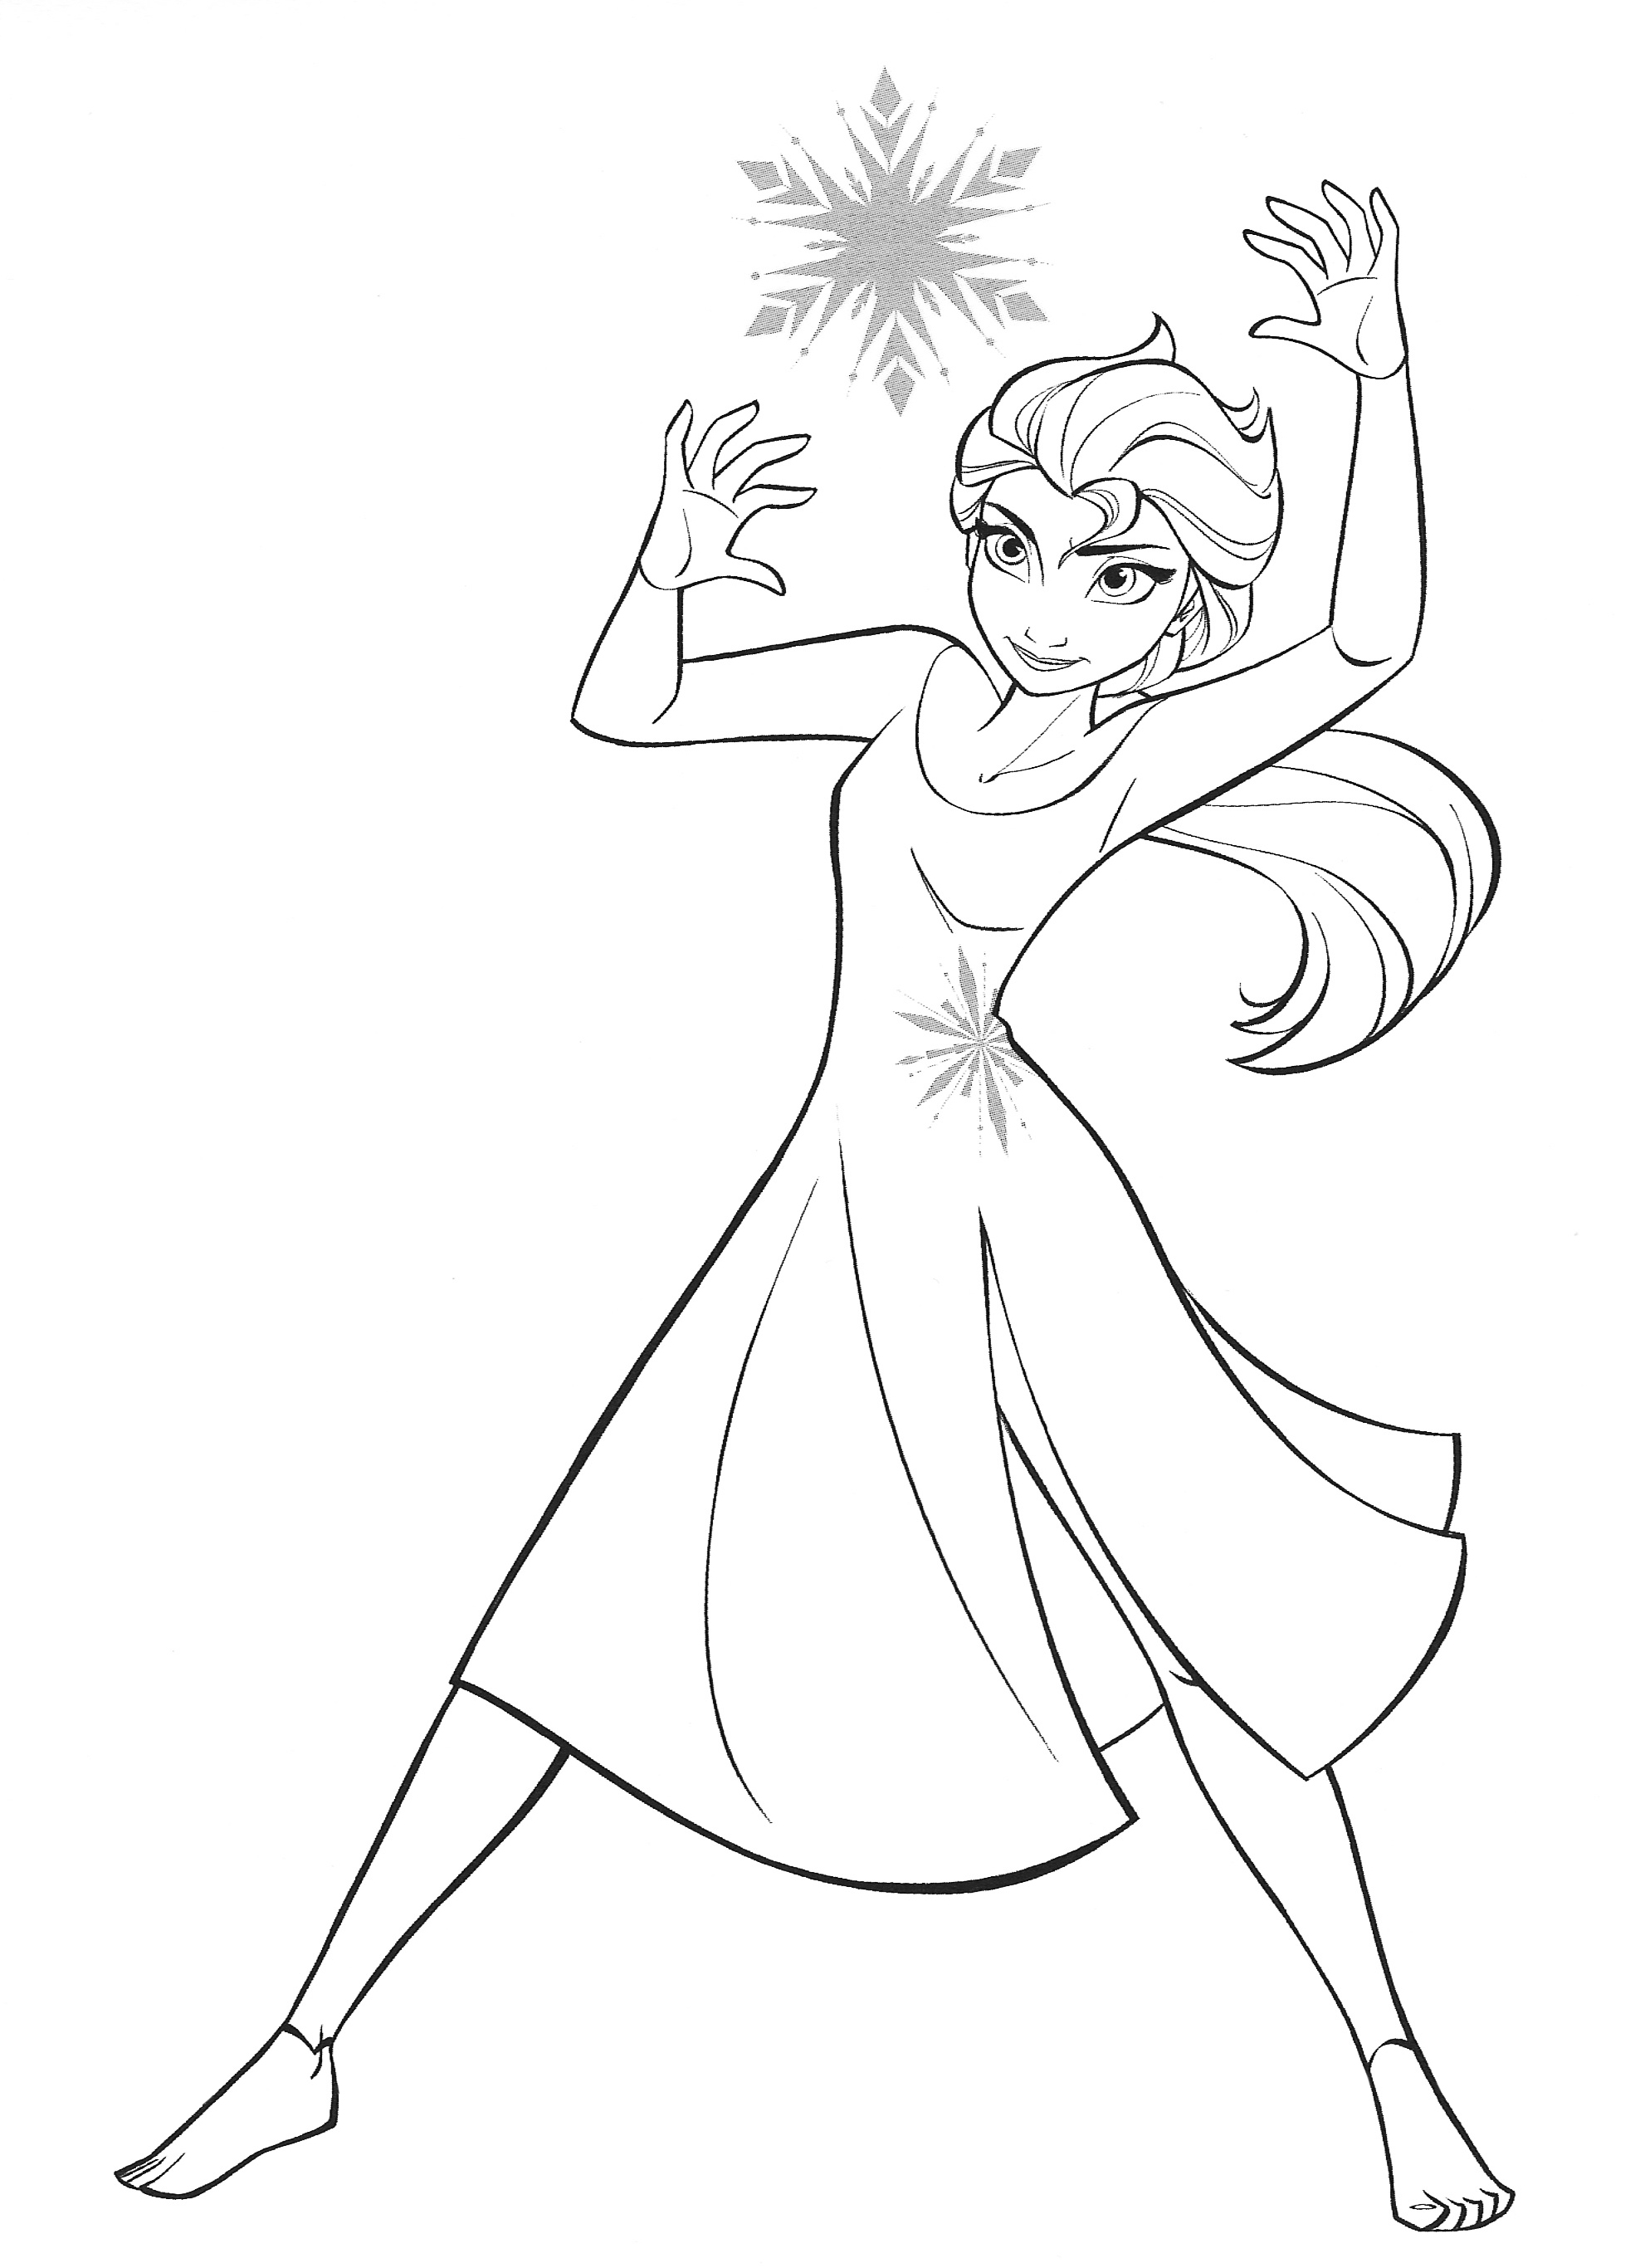 New Frozen 20 coloring pages with Elsa   YouLoveIt.com